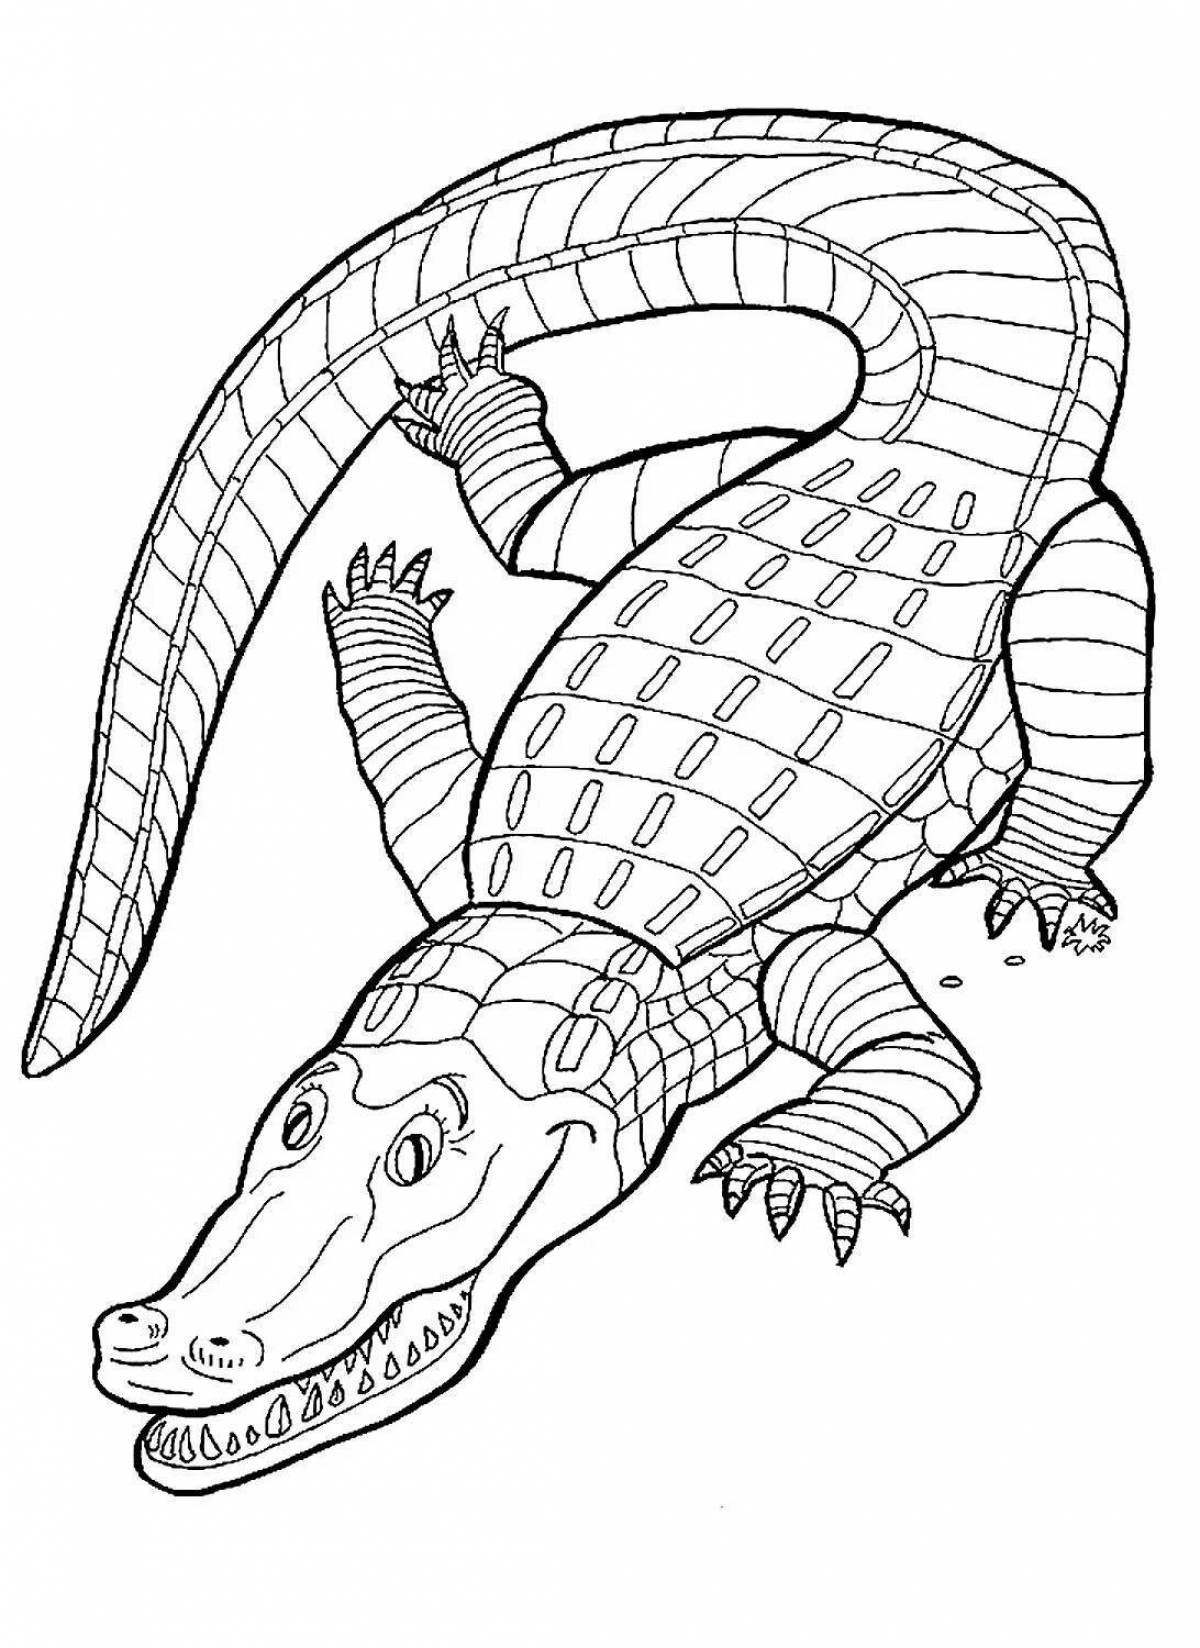 Incredible reptile coloring pages